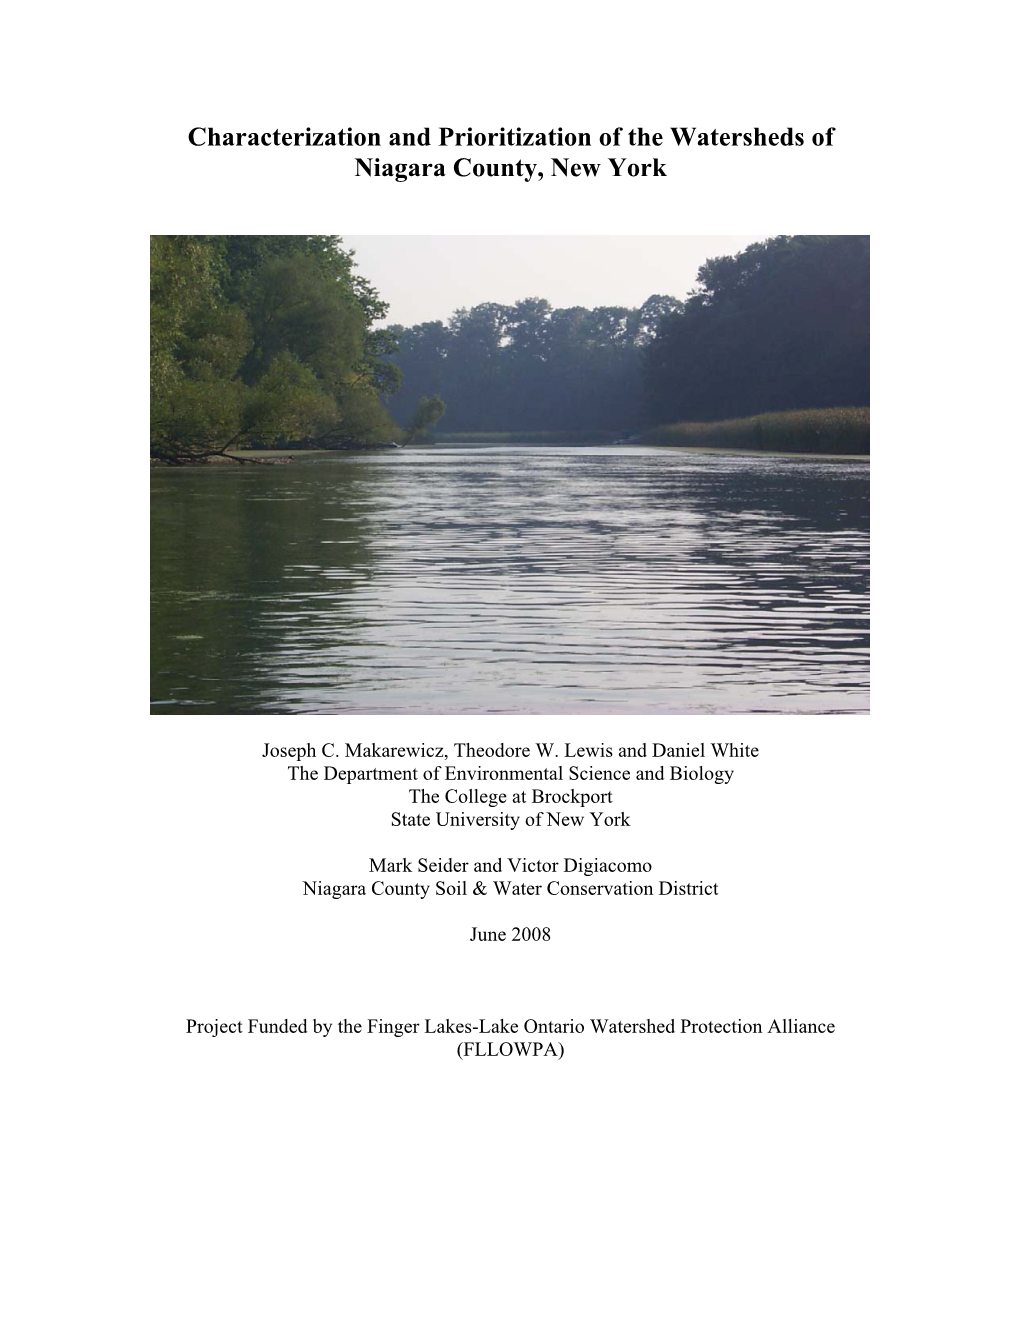 Characterization and Prioritization of the Watersheds of Niagara County, New York